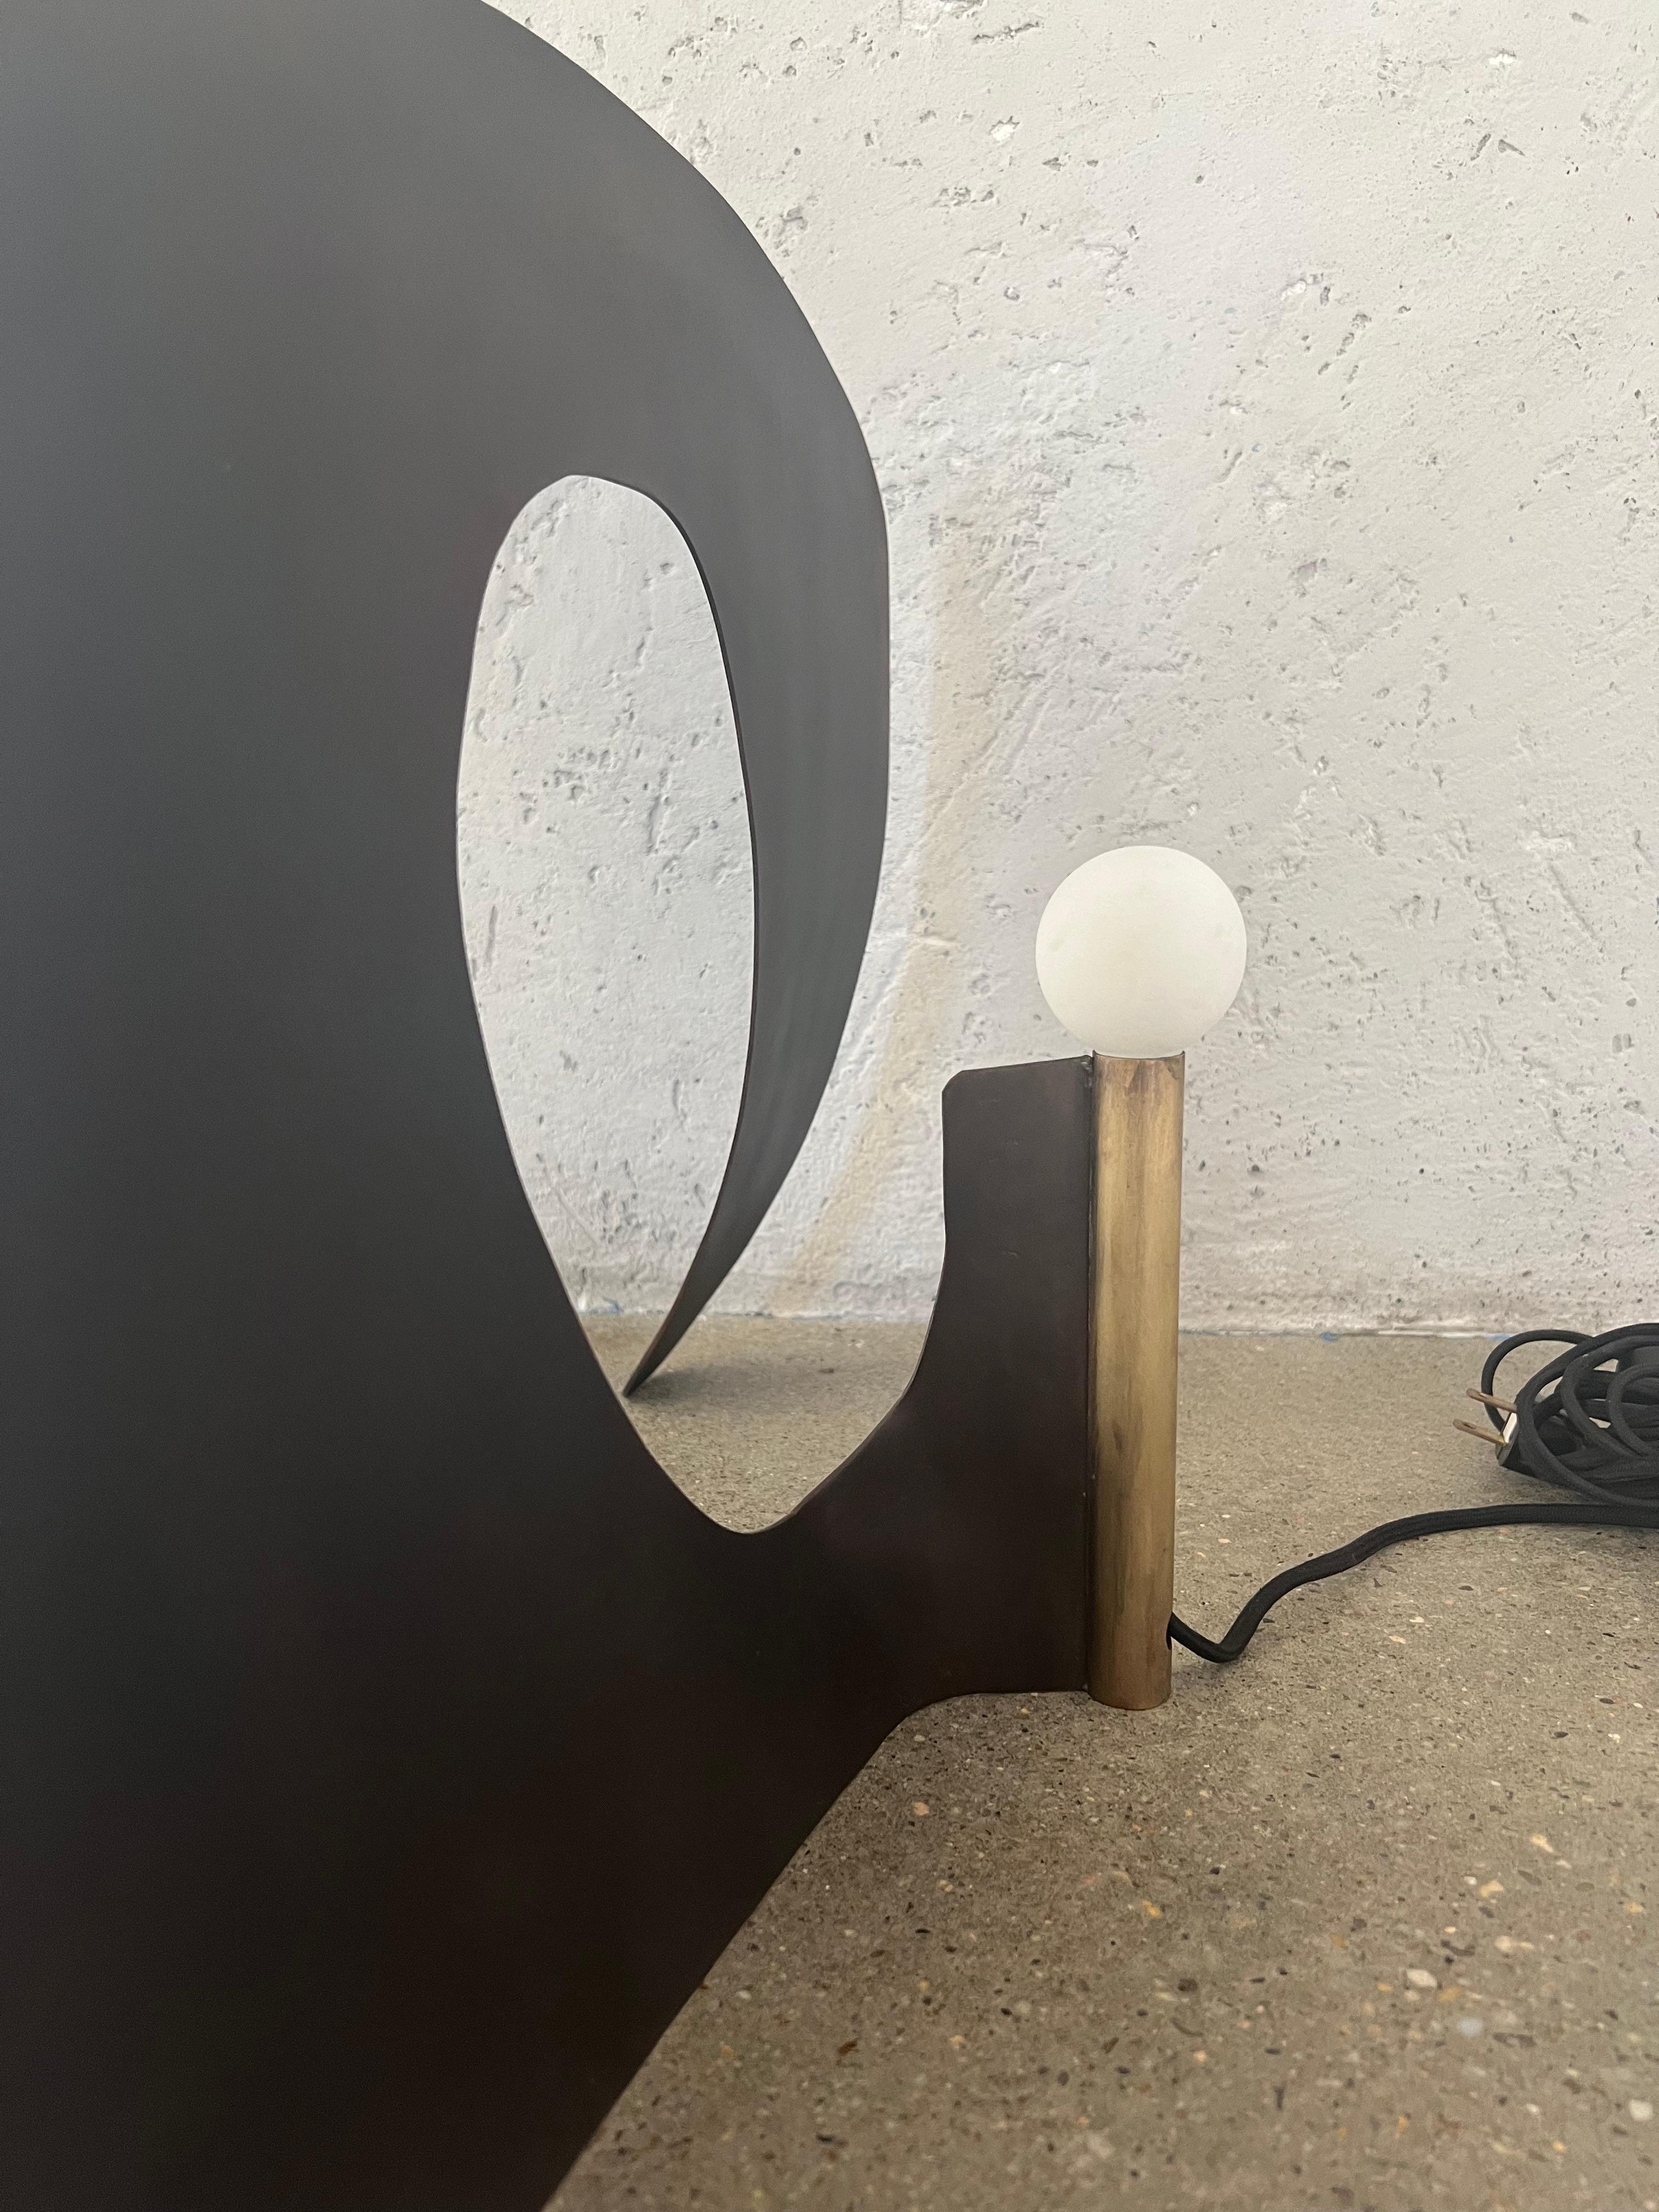 At the top sits a porcelain bulb, adding an element of delicacy and contrast to the sturdy brass base. Porcelain, with its smooth texture and clean appearance, complements the richness of the brass and provides a platform for the light source.

The